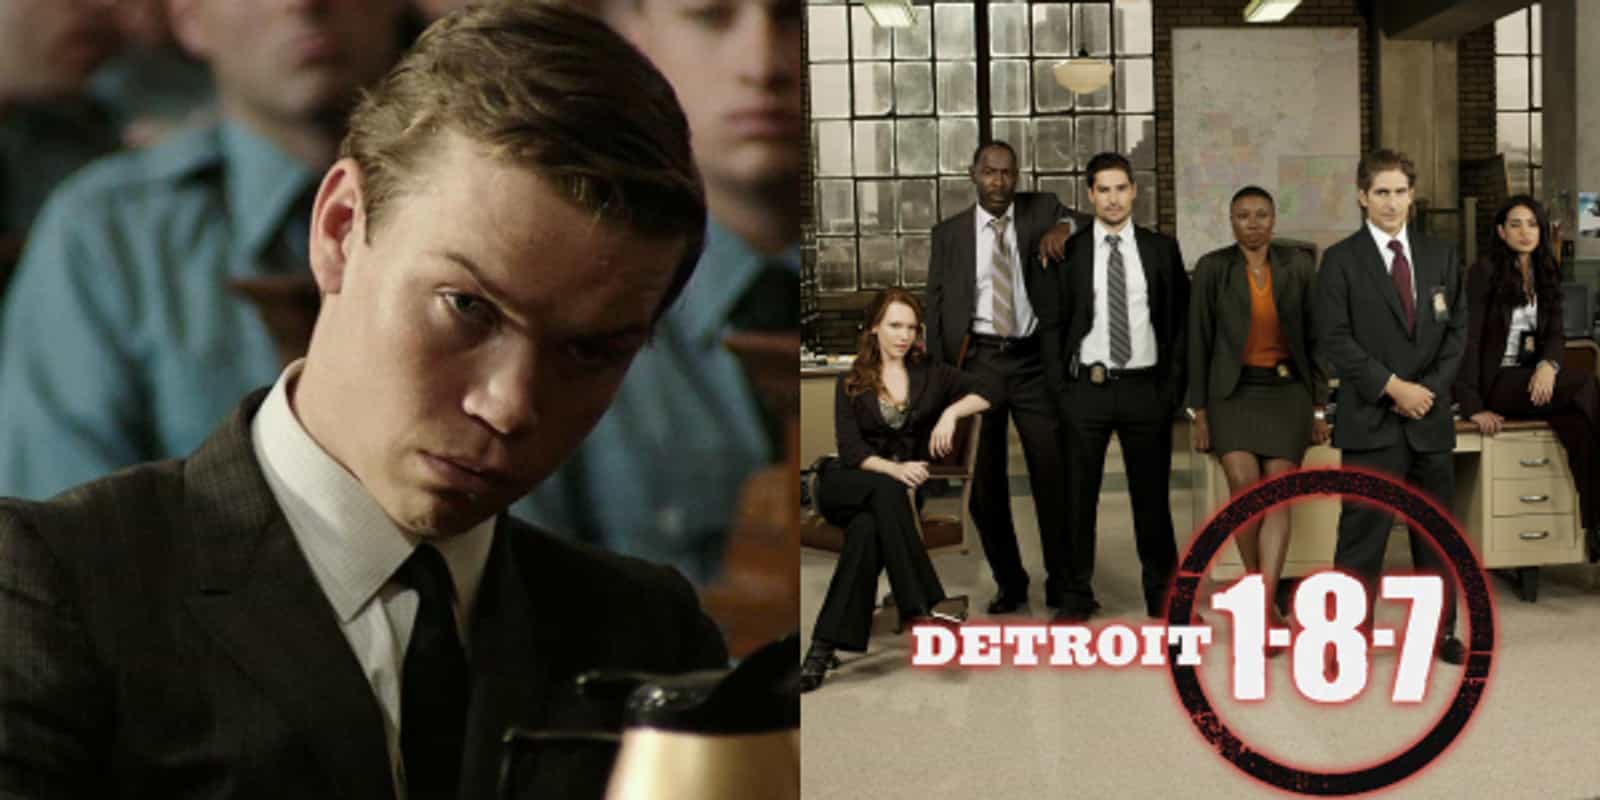 15+ Movies And Shows With Detroit In The Title